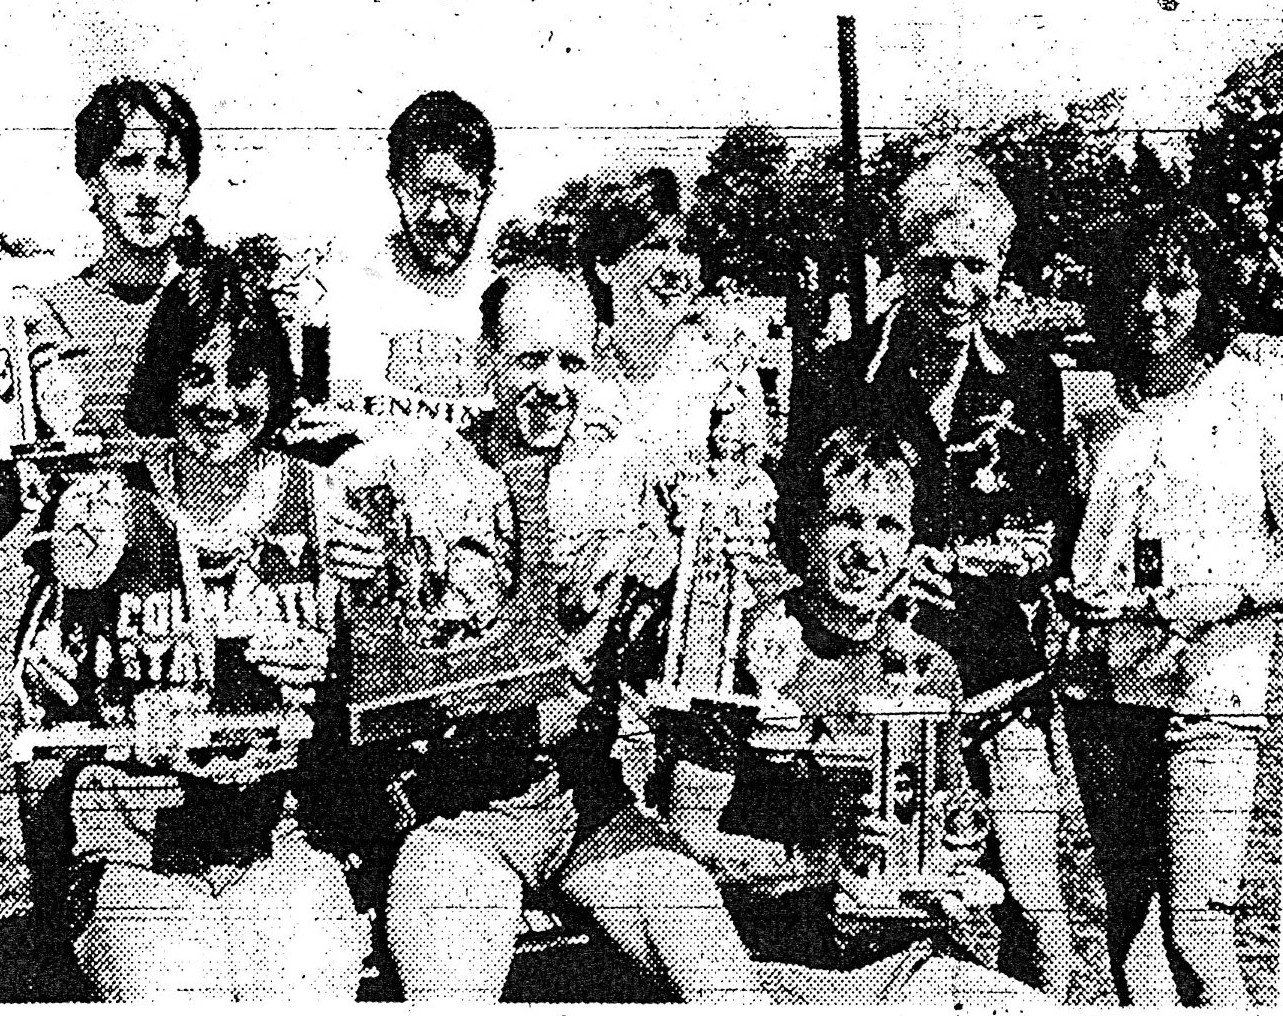 Pictured are the winners of the Wirral Charities Marathon; left to right, front: Su Hall (1st Lady and 1st Lady Veteran), Harry Clague (winner), and Ian Corrin (second). Back Steve Bullock (third), John Cottrell (first veteran), Pat Fenn (second lady), B. Woolford (second veteran), and L. Shaw (third lady).